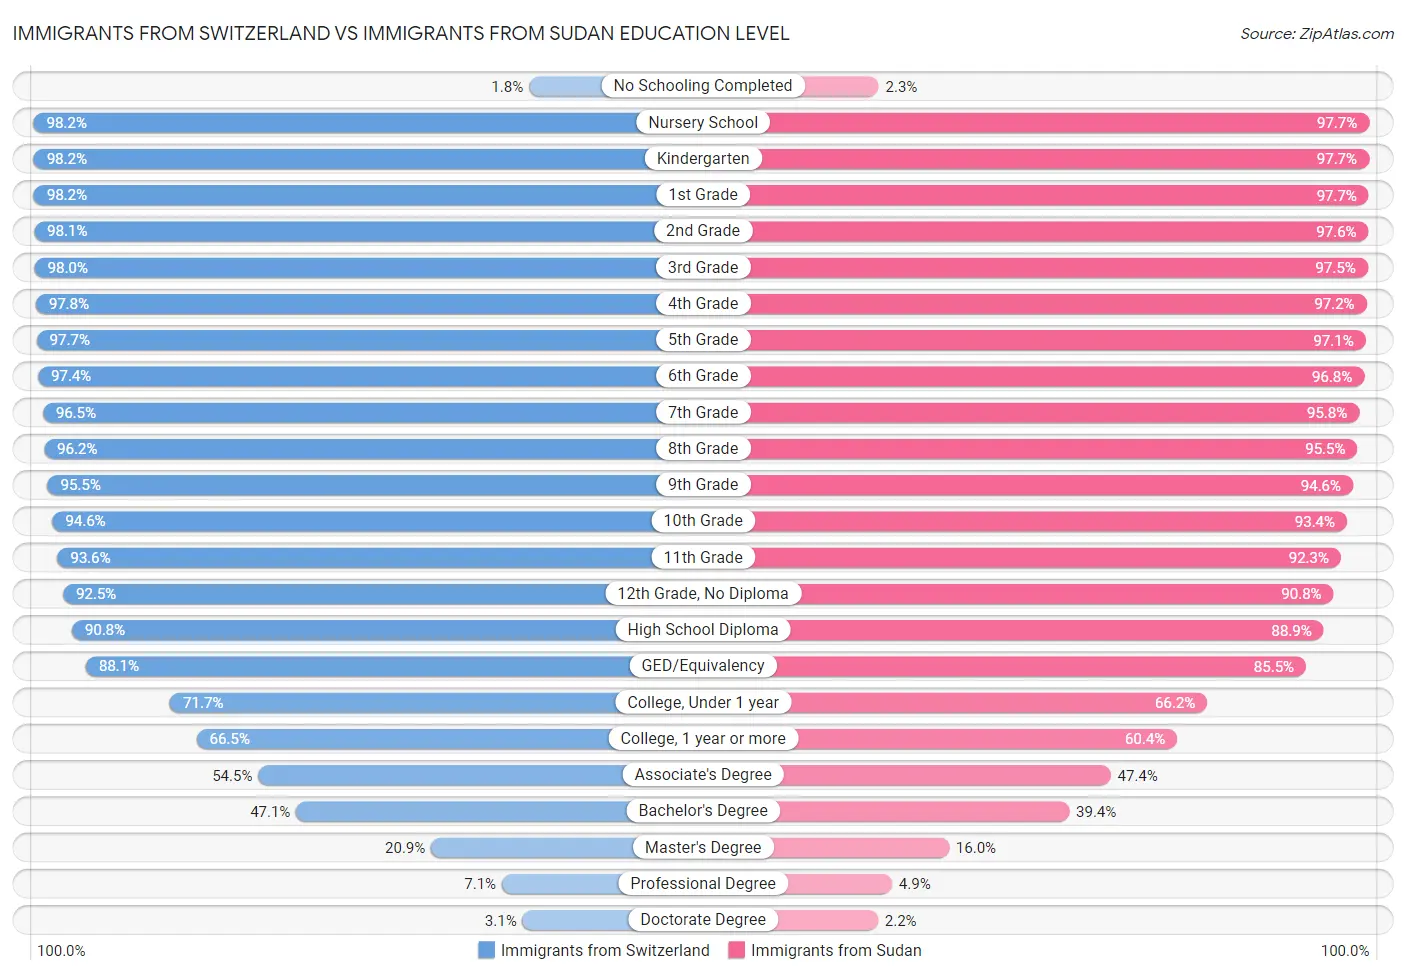 Immigrants from Switzerland vs Immigrants from Sudan Education Level